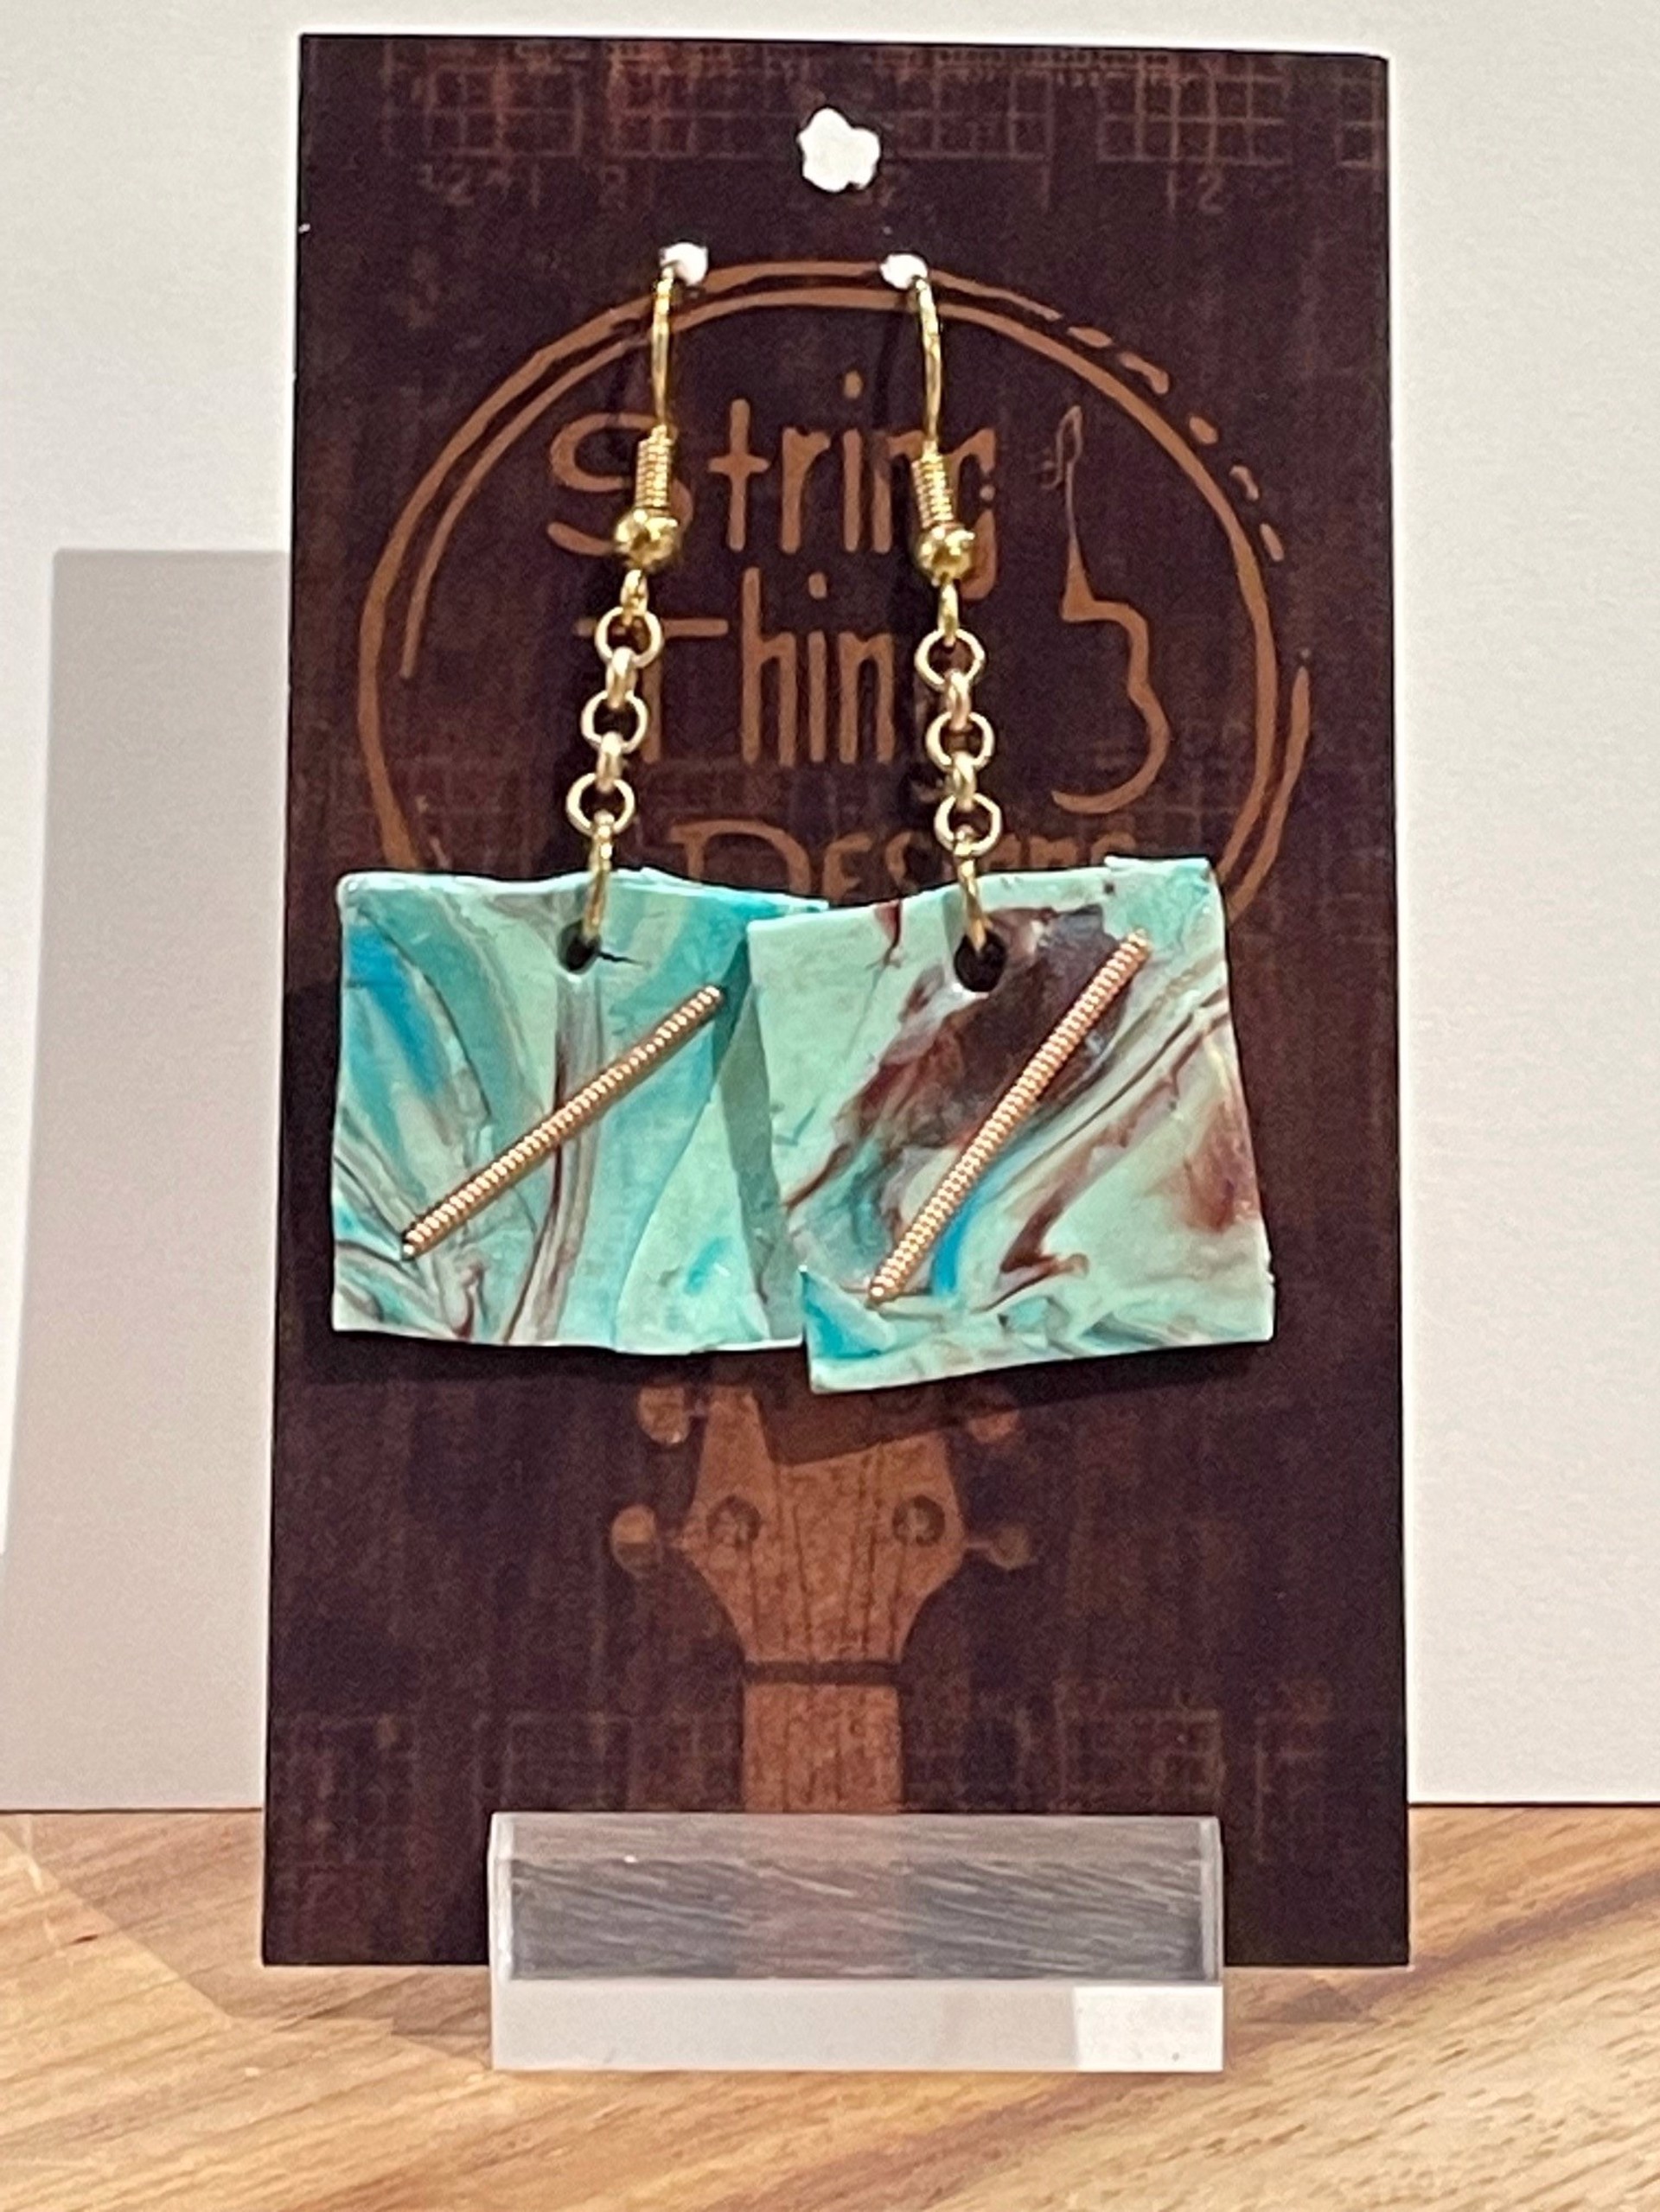 Blue Square Guitar String Earrings by String Thing Designs